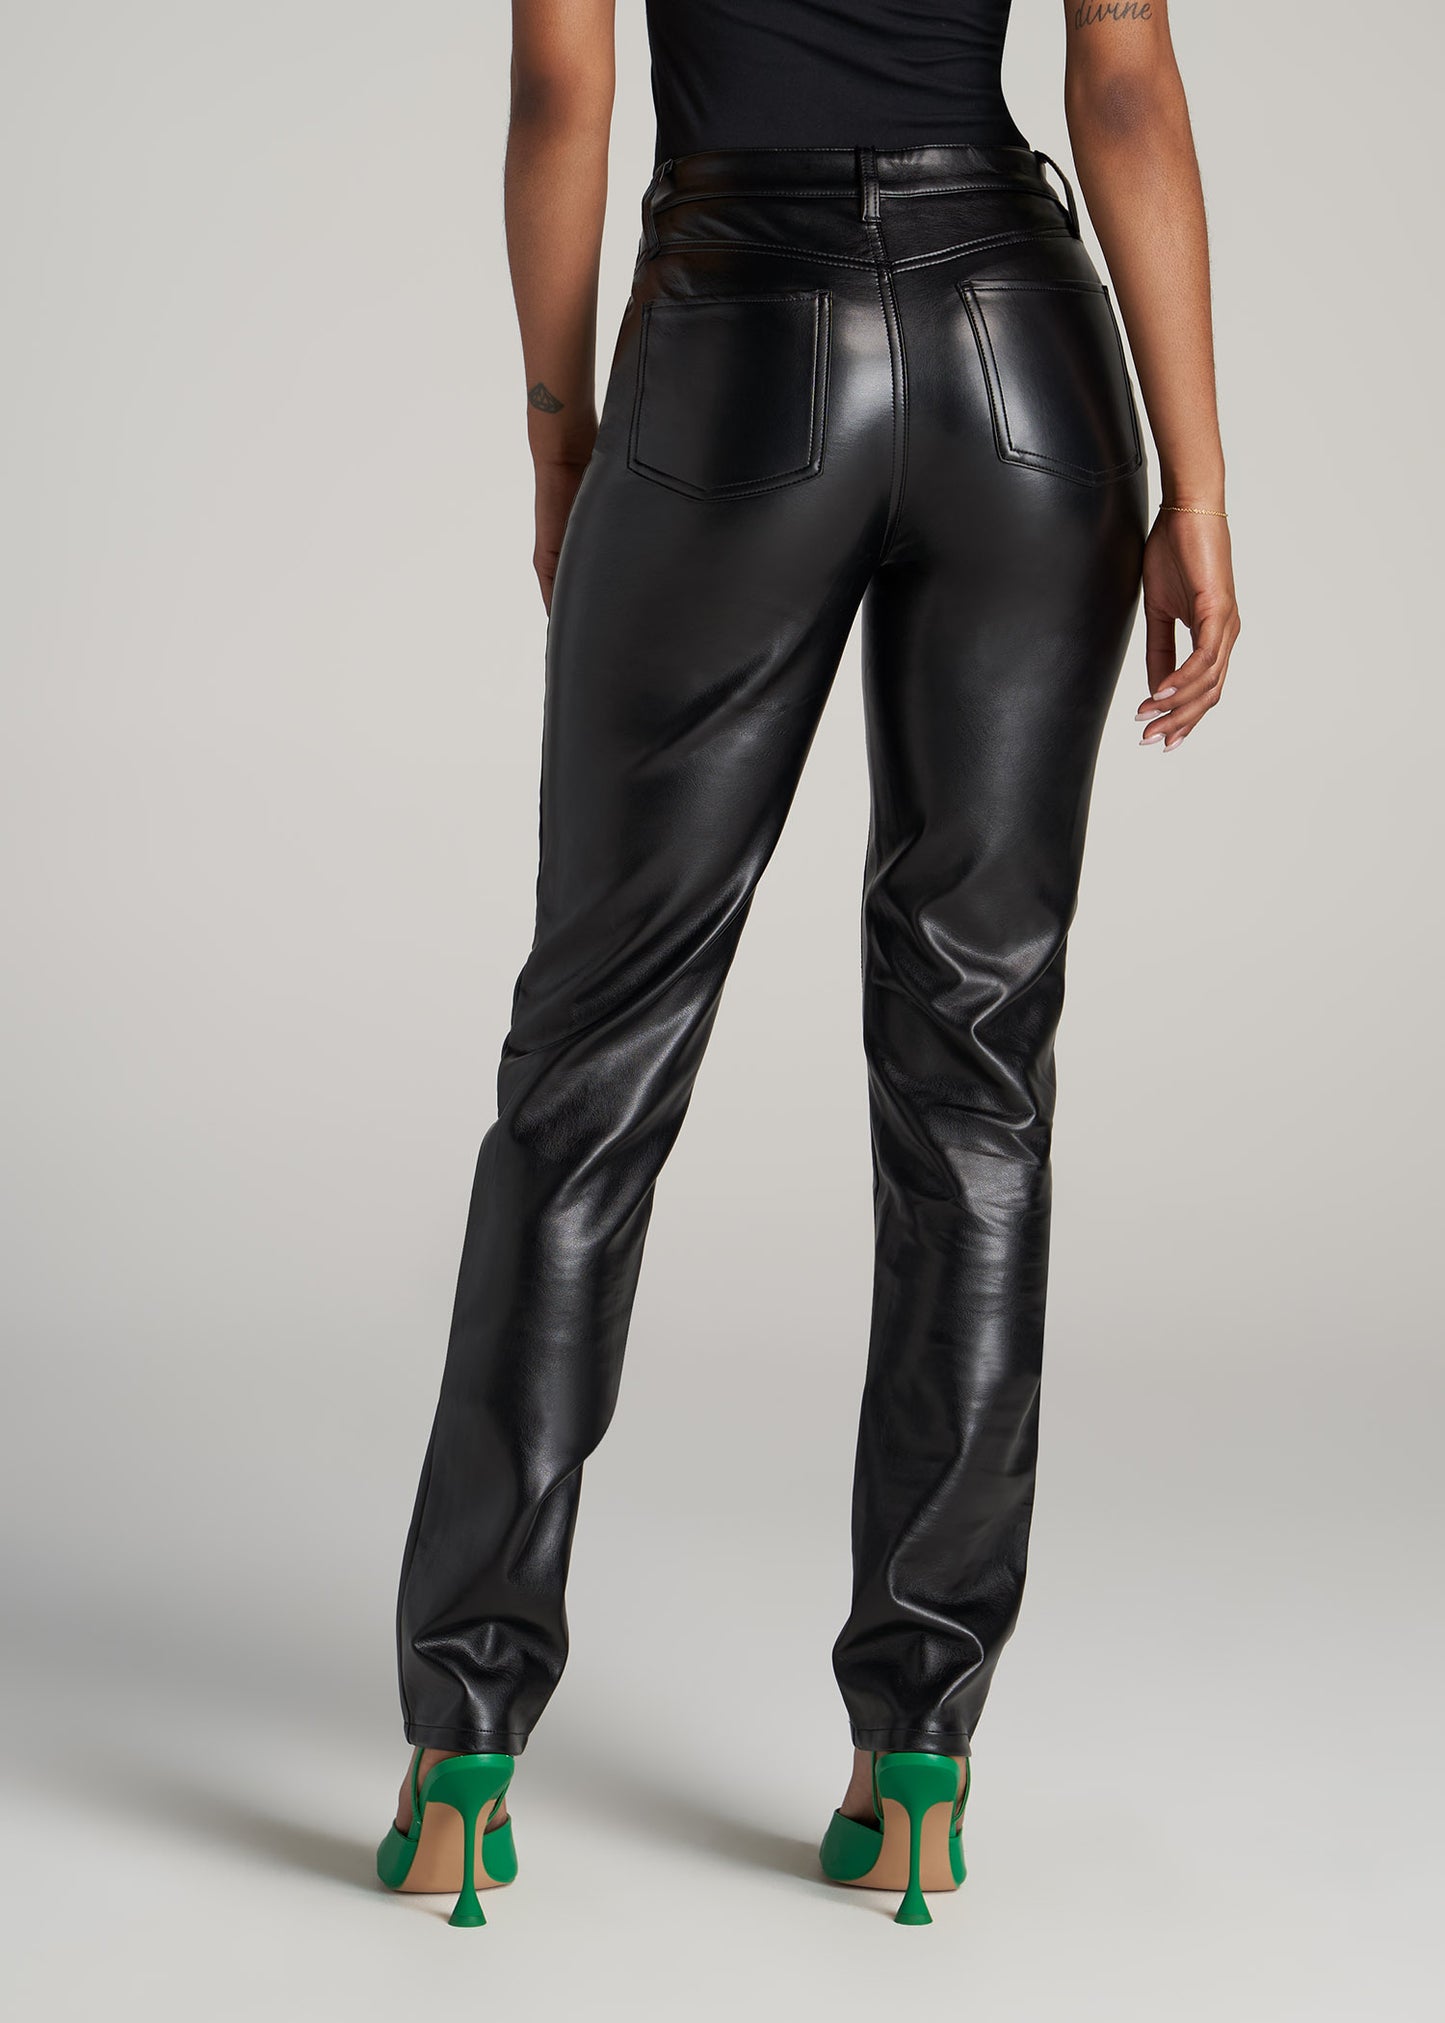 High Waist Stretch Black Leather Slim Fit Faux Leather Pants For